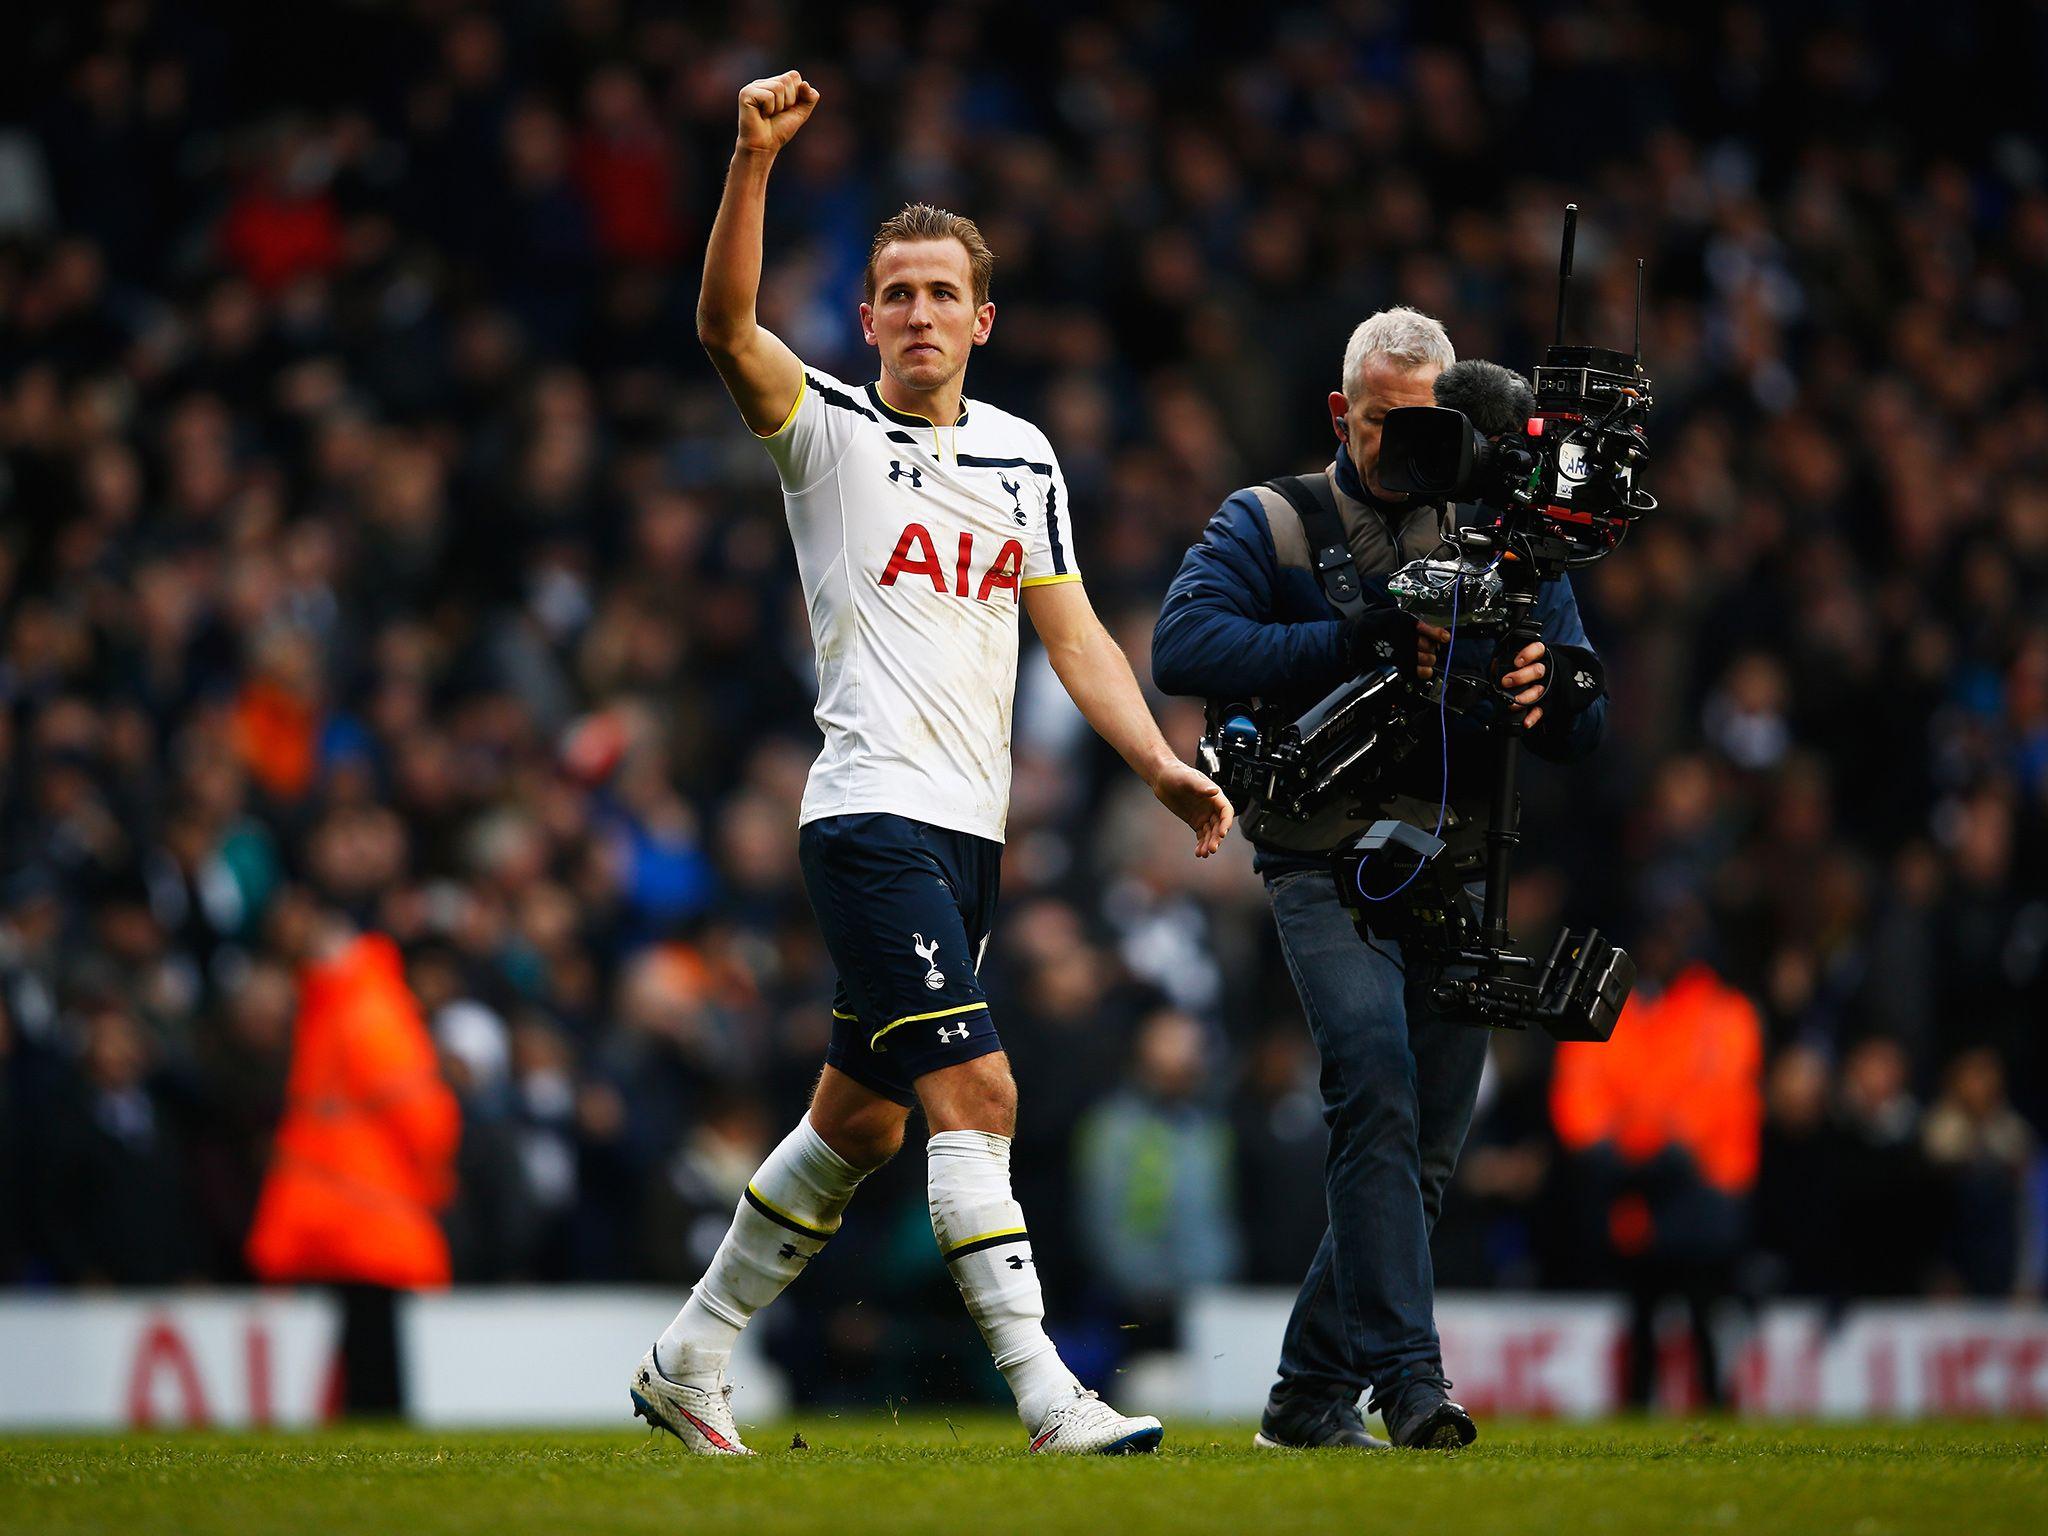 Chelsea vs Tottenham: Harry Kane was at Wembley to see Spurs beat